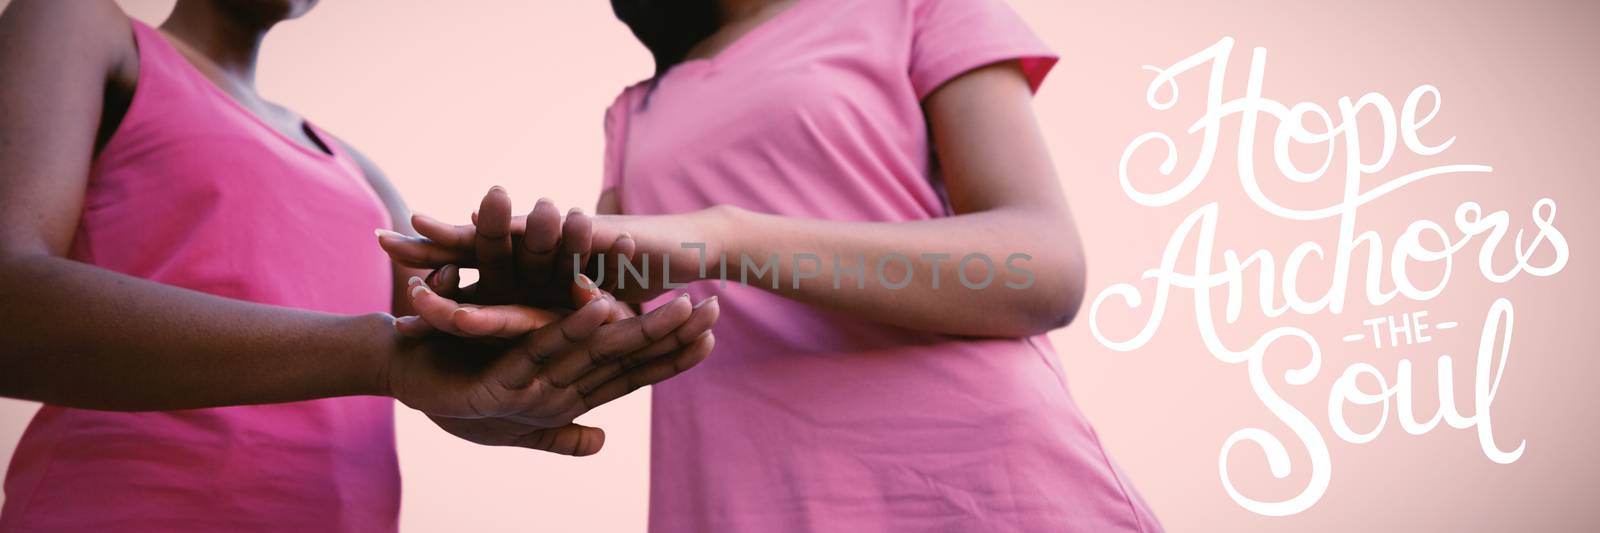 two black women joining hands against pink background 